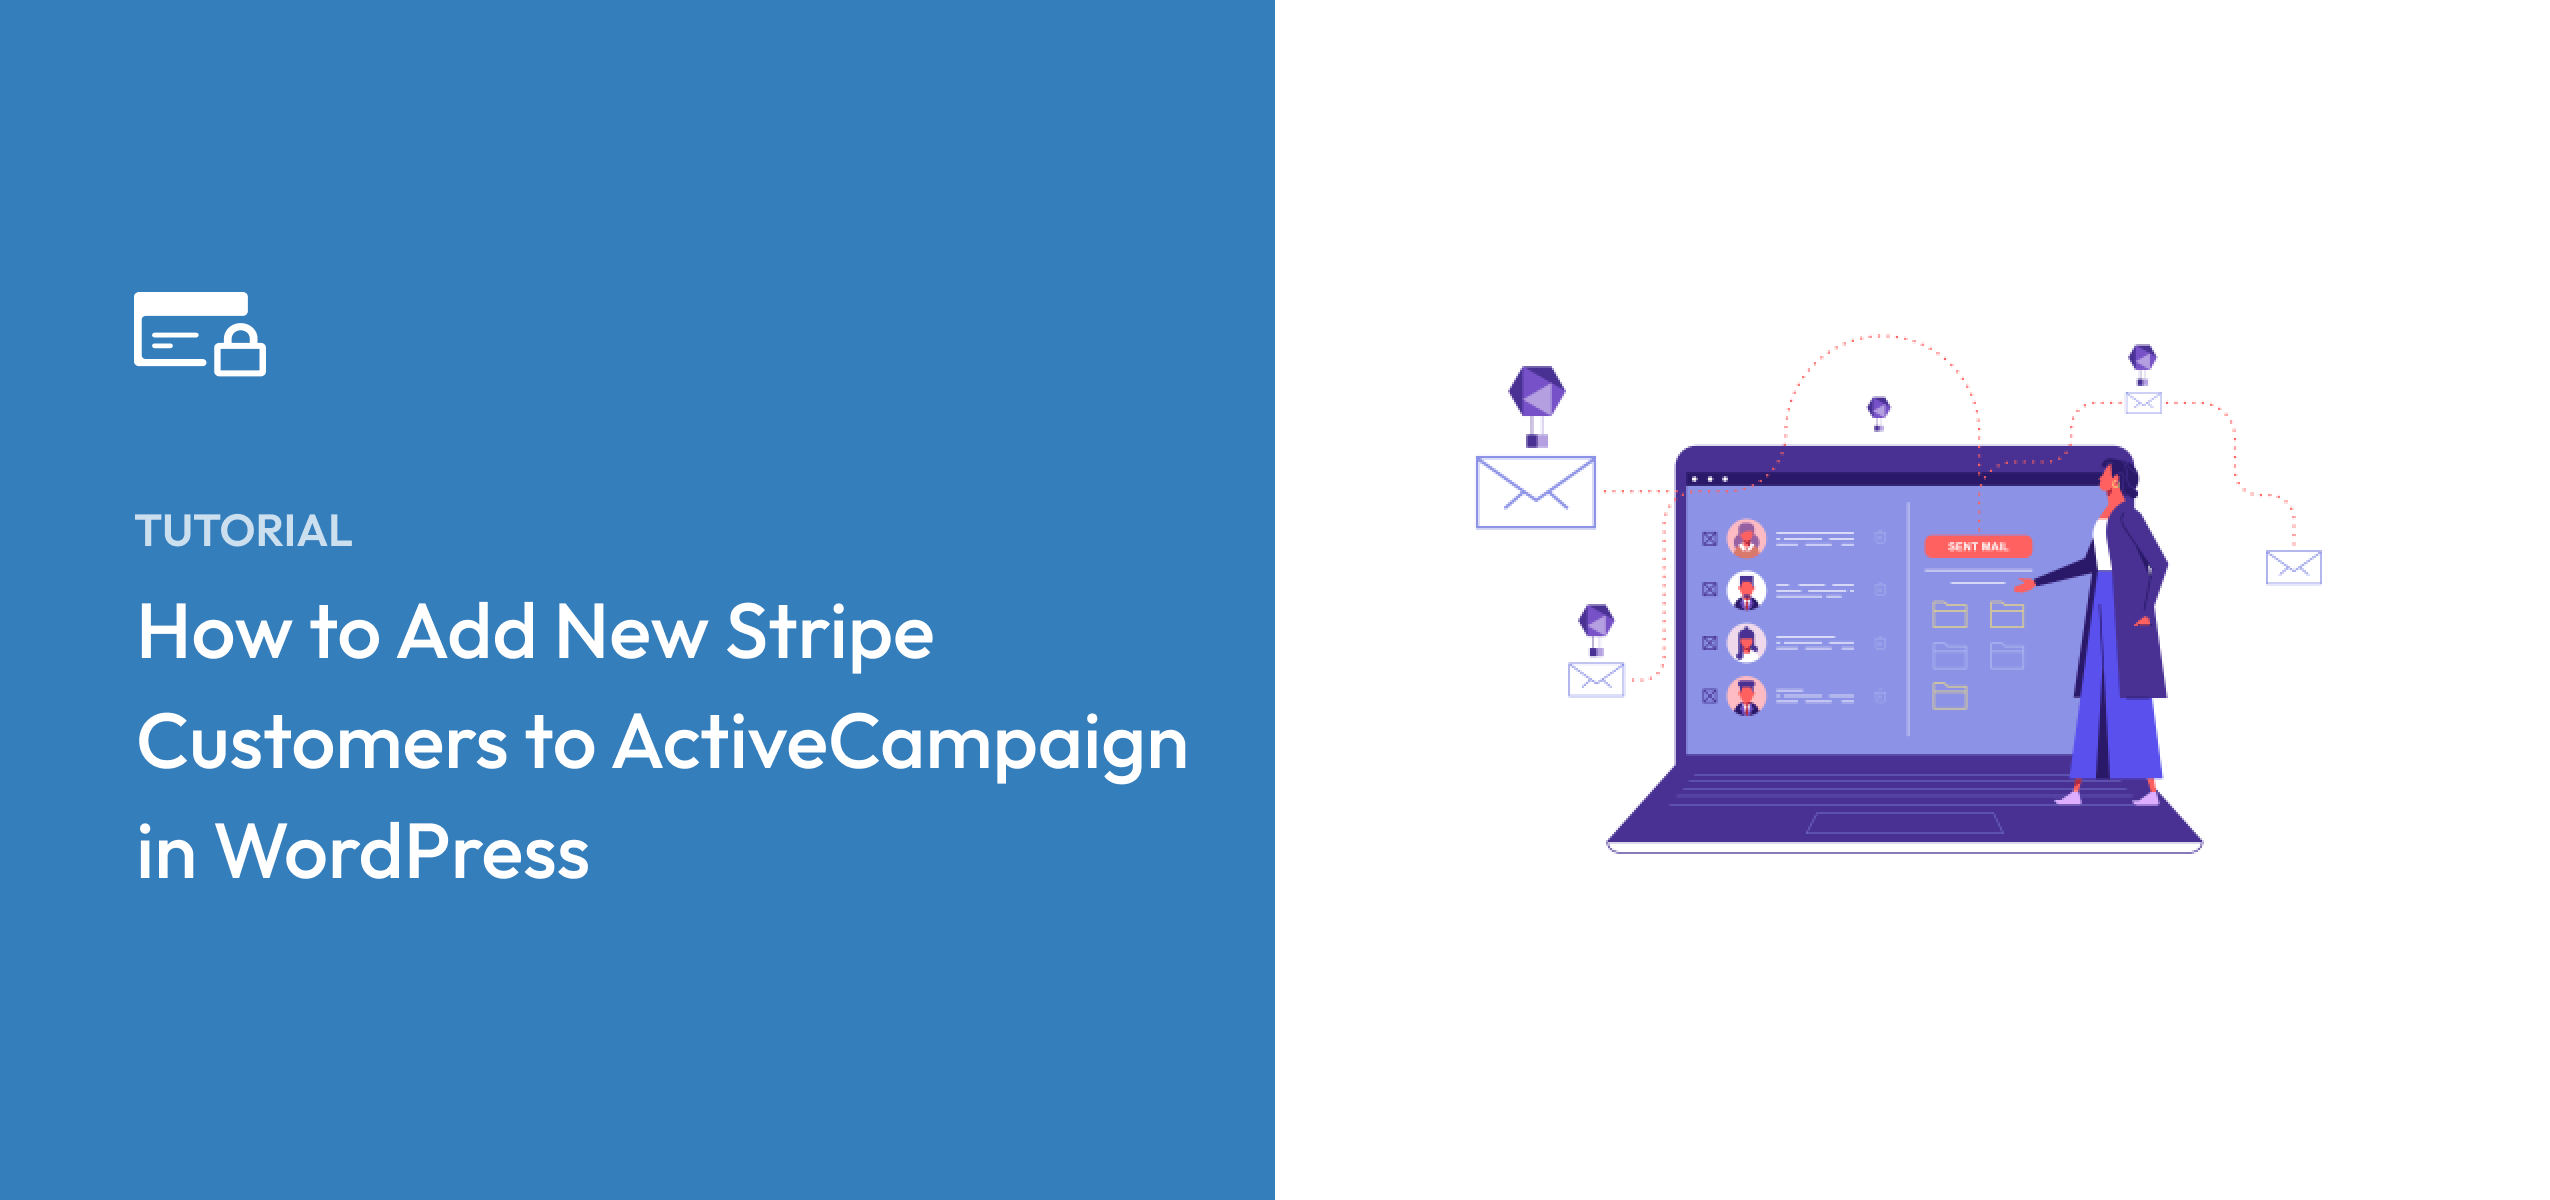 How to Add New Stripe Customers to ActiveCampaign in WordPress